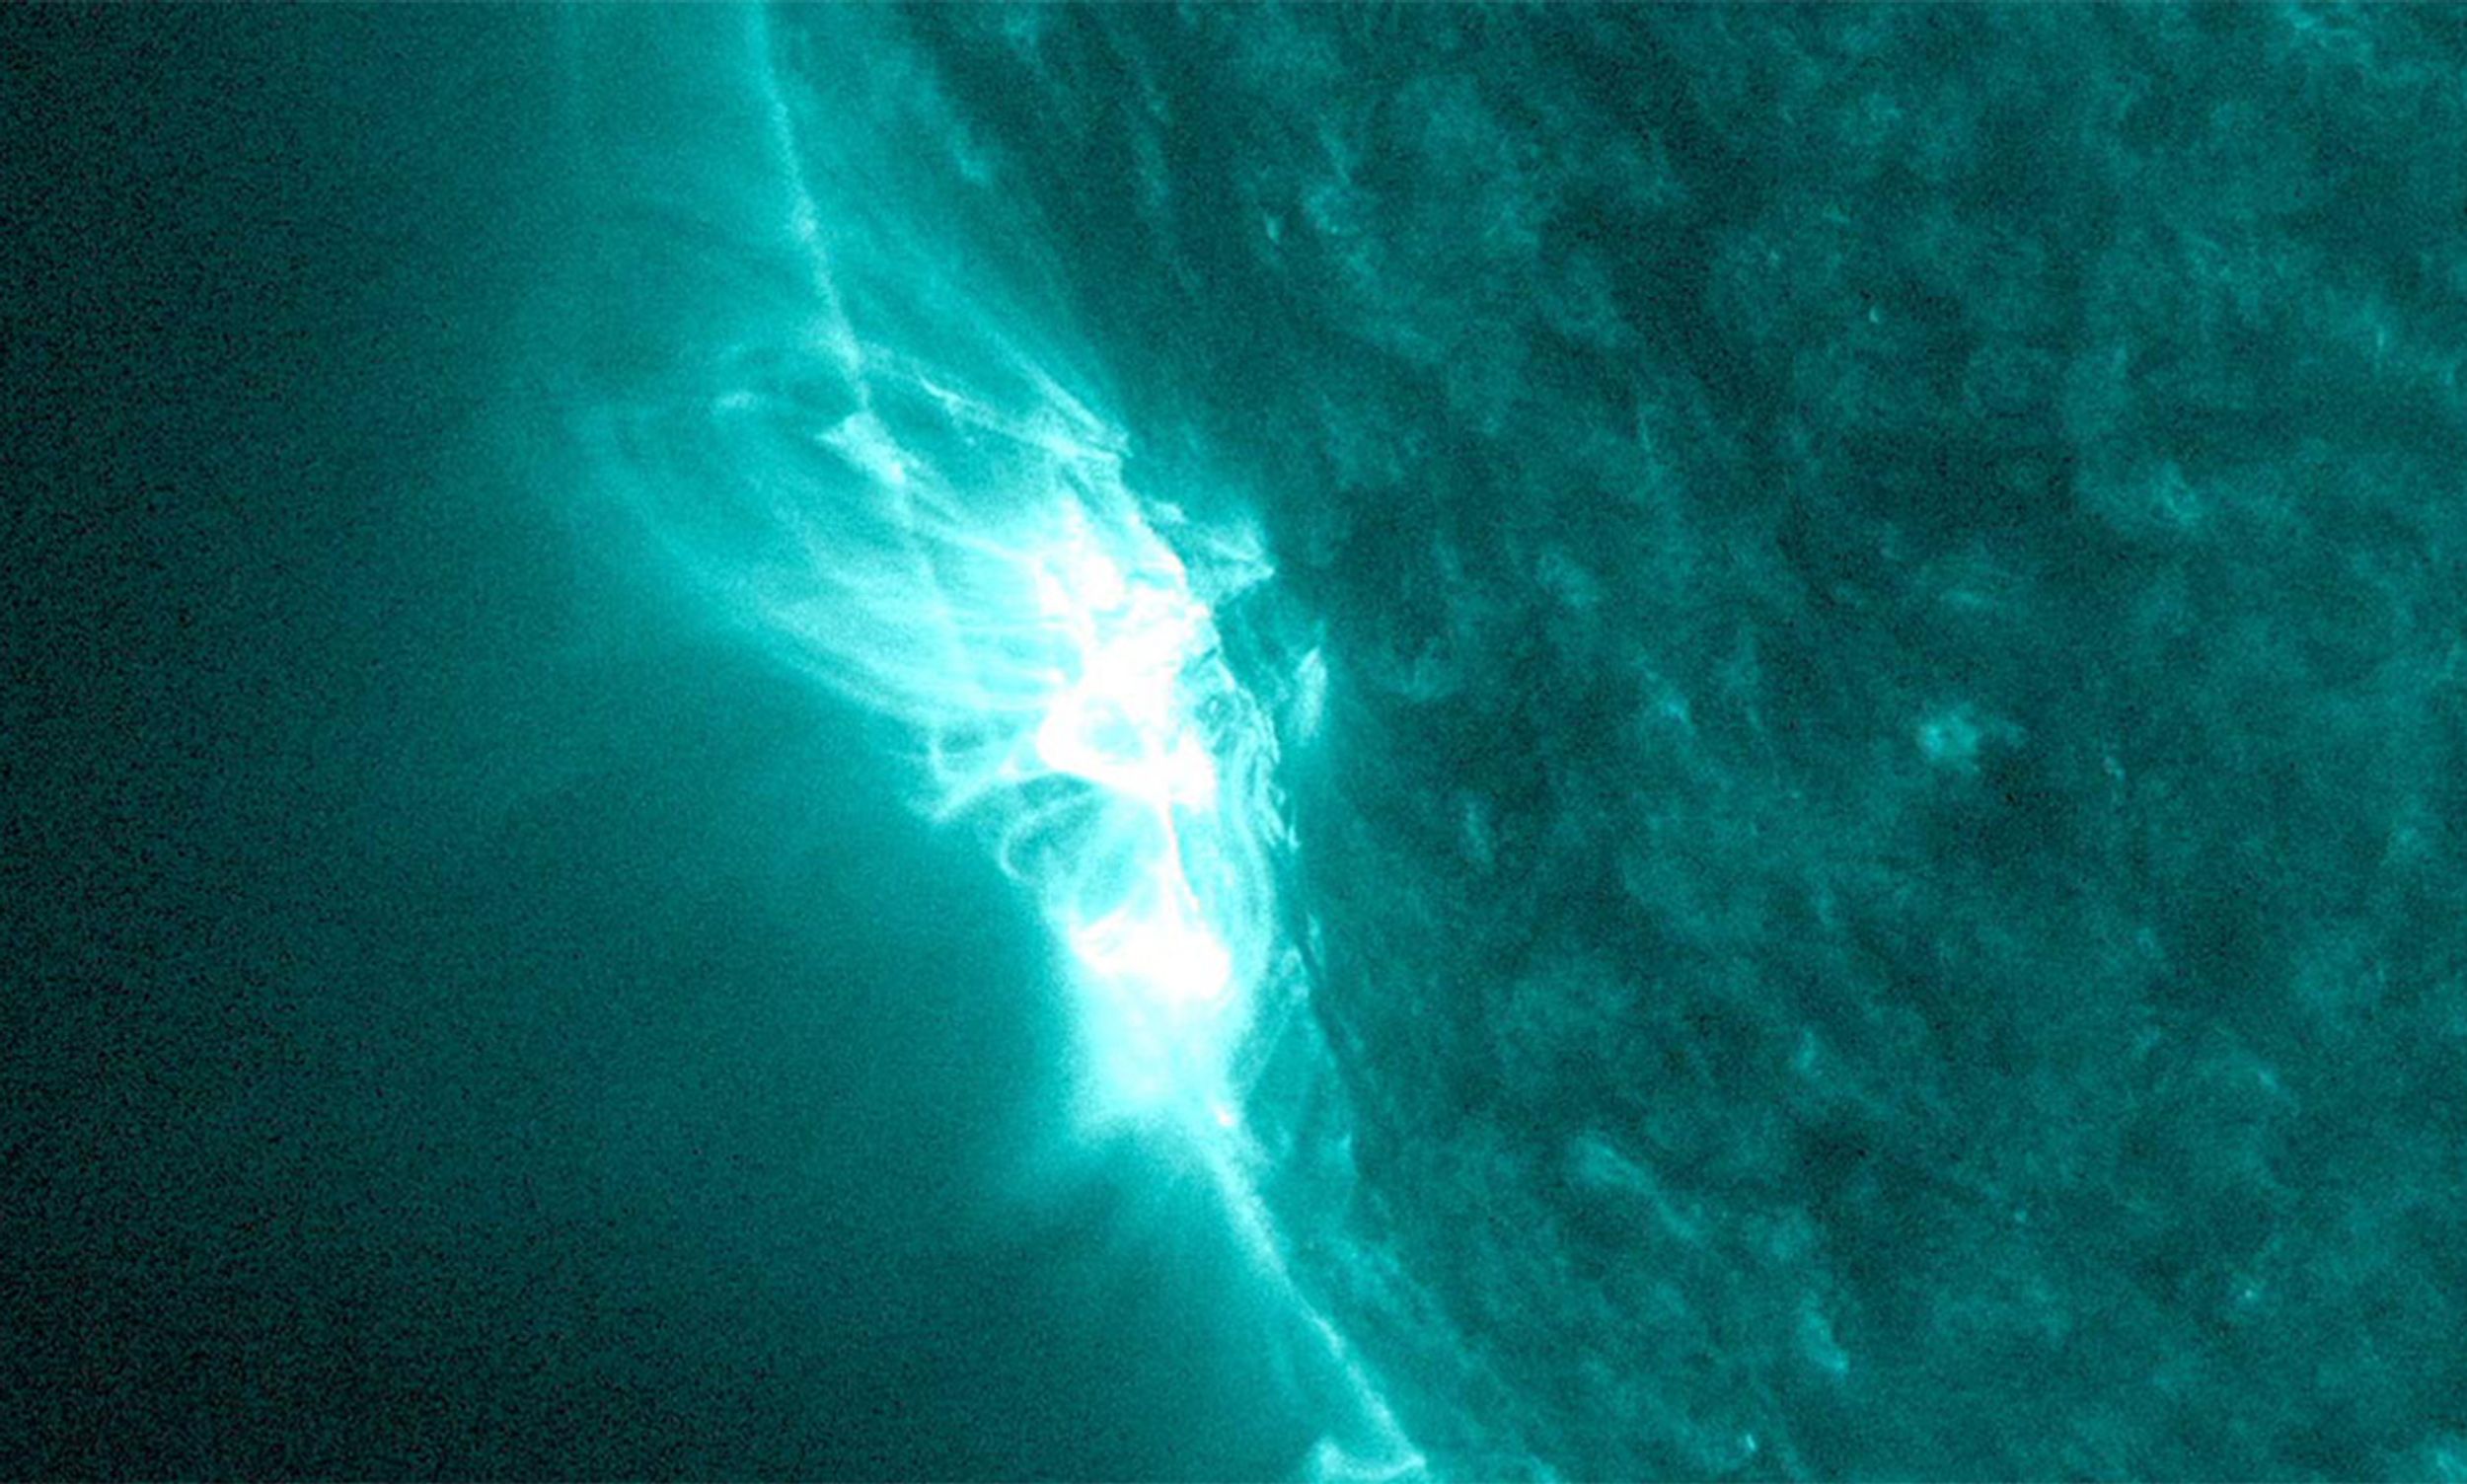 In 2013, NASA's Solar Dynamics Observatory captured a high-resolution image of a solar flare's magnetic fields twisting and snapping off -- to eject high-energy material into space.